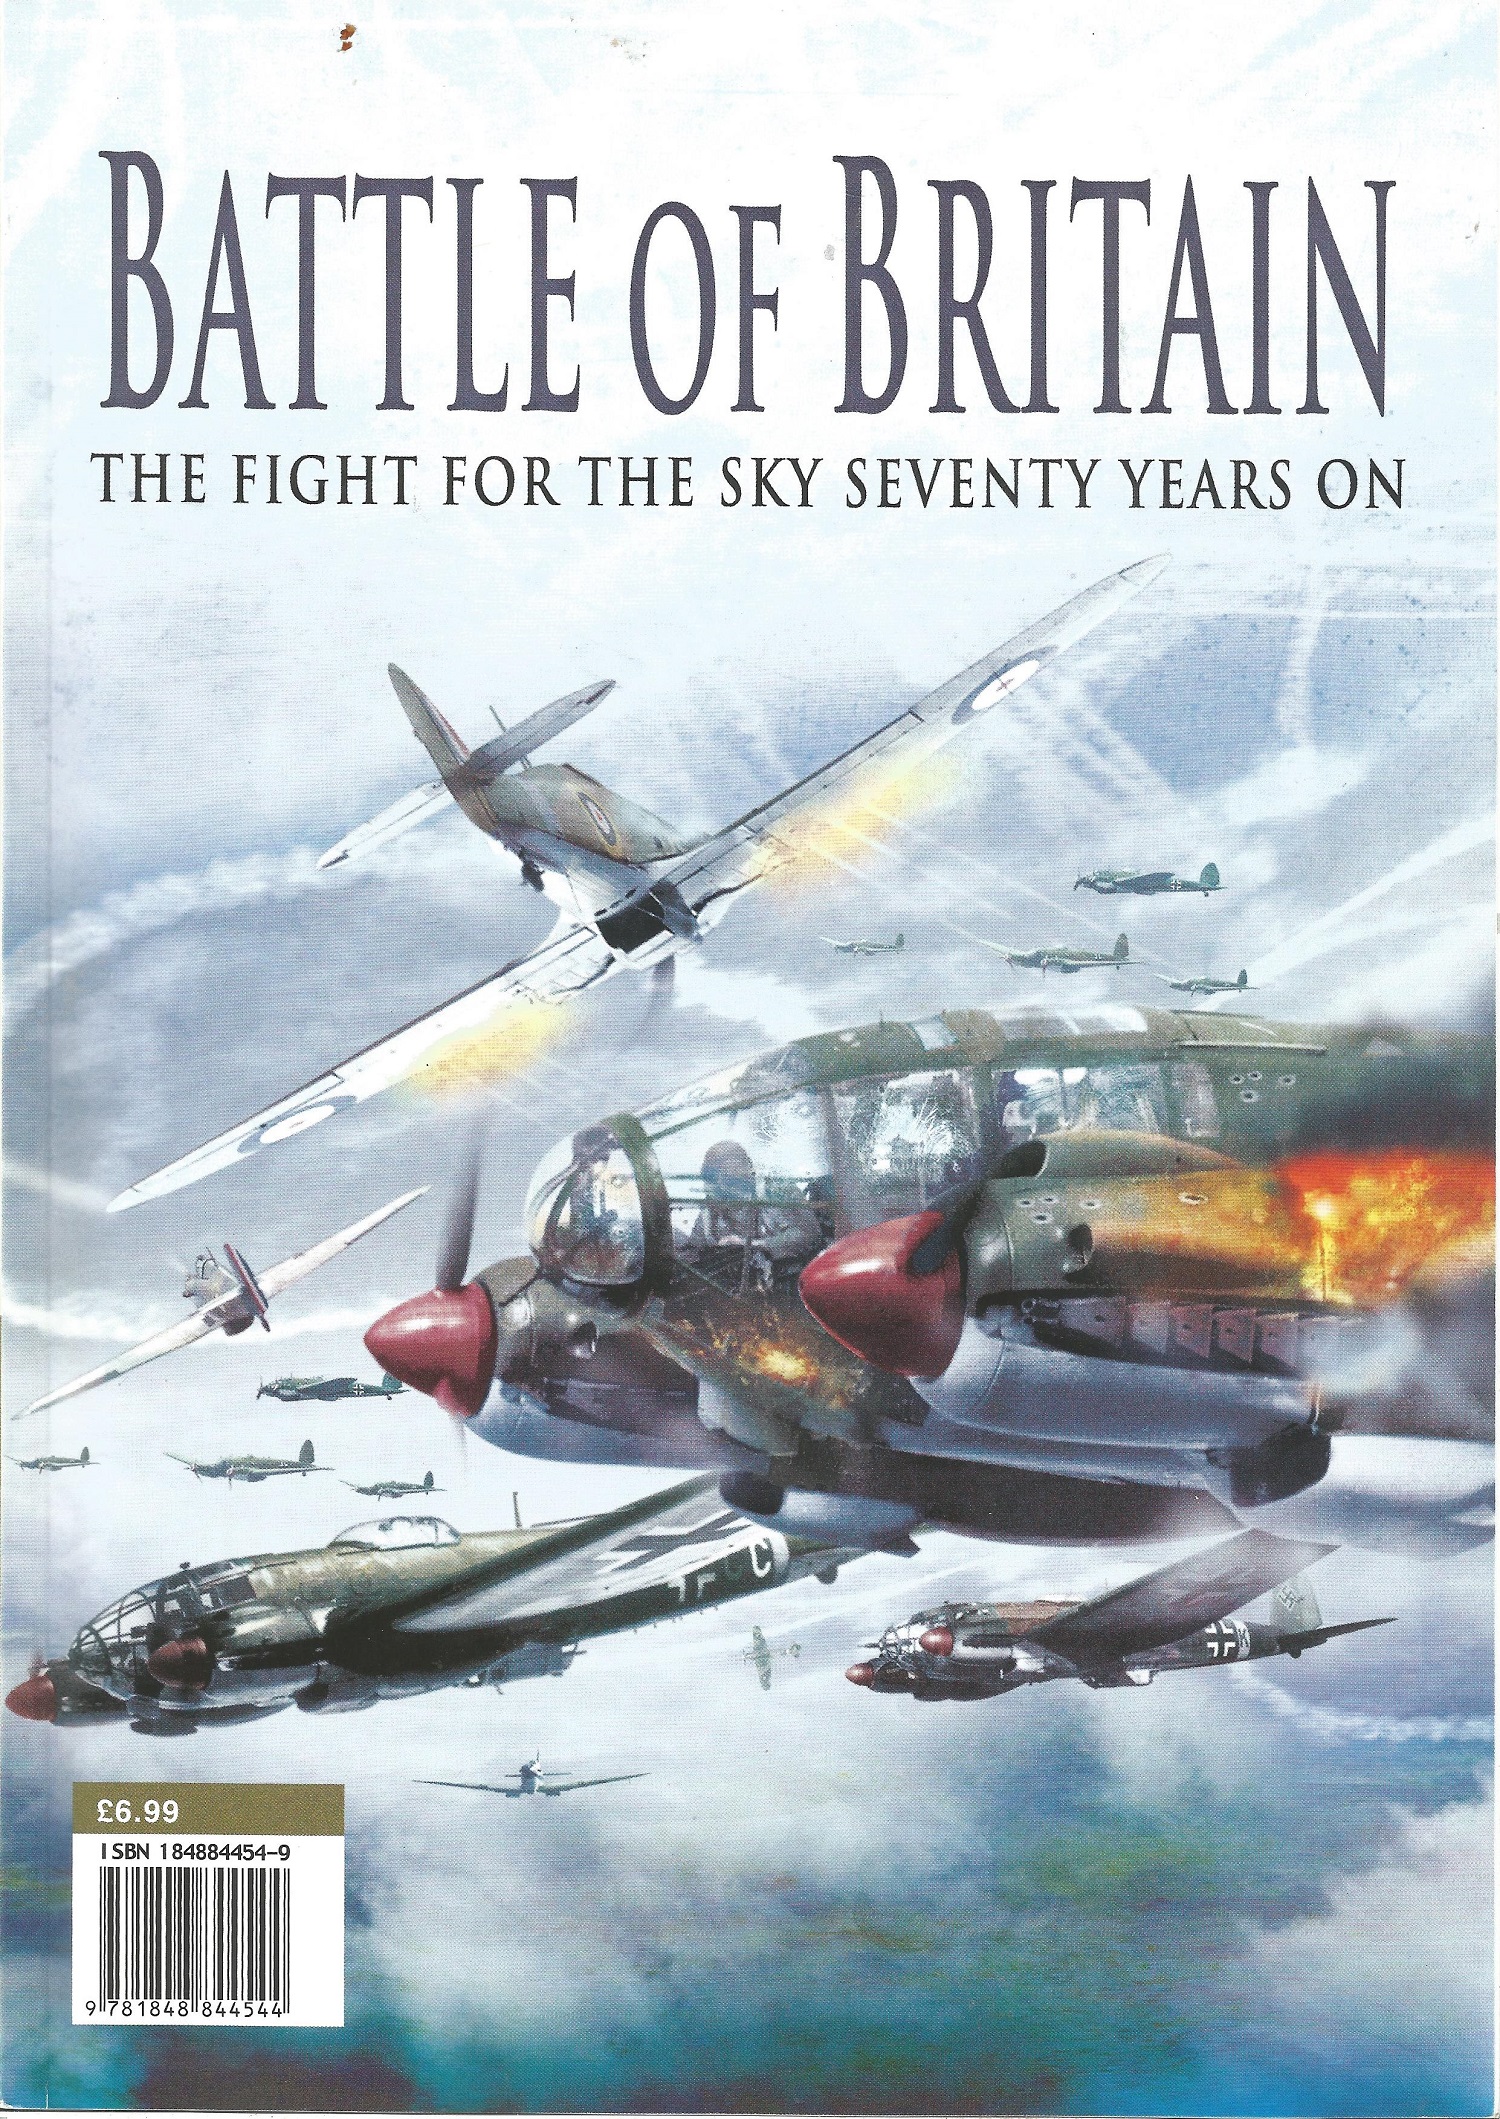 Battle of Britain softback book titled The Fight for the Sky Seventy Years On 98 pages looking